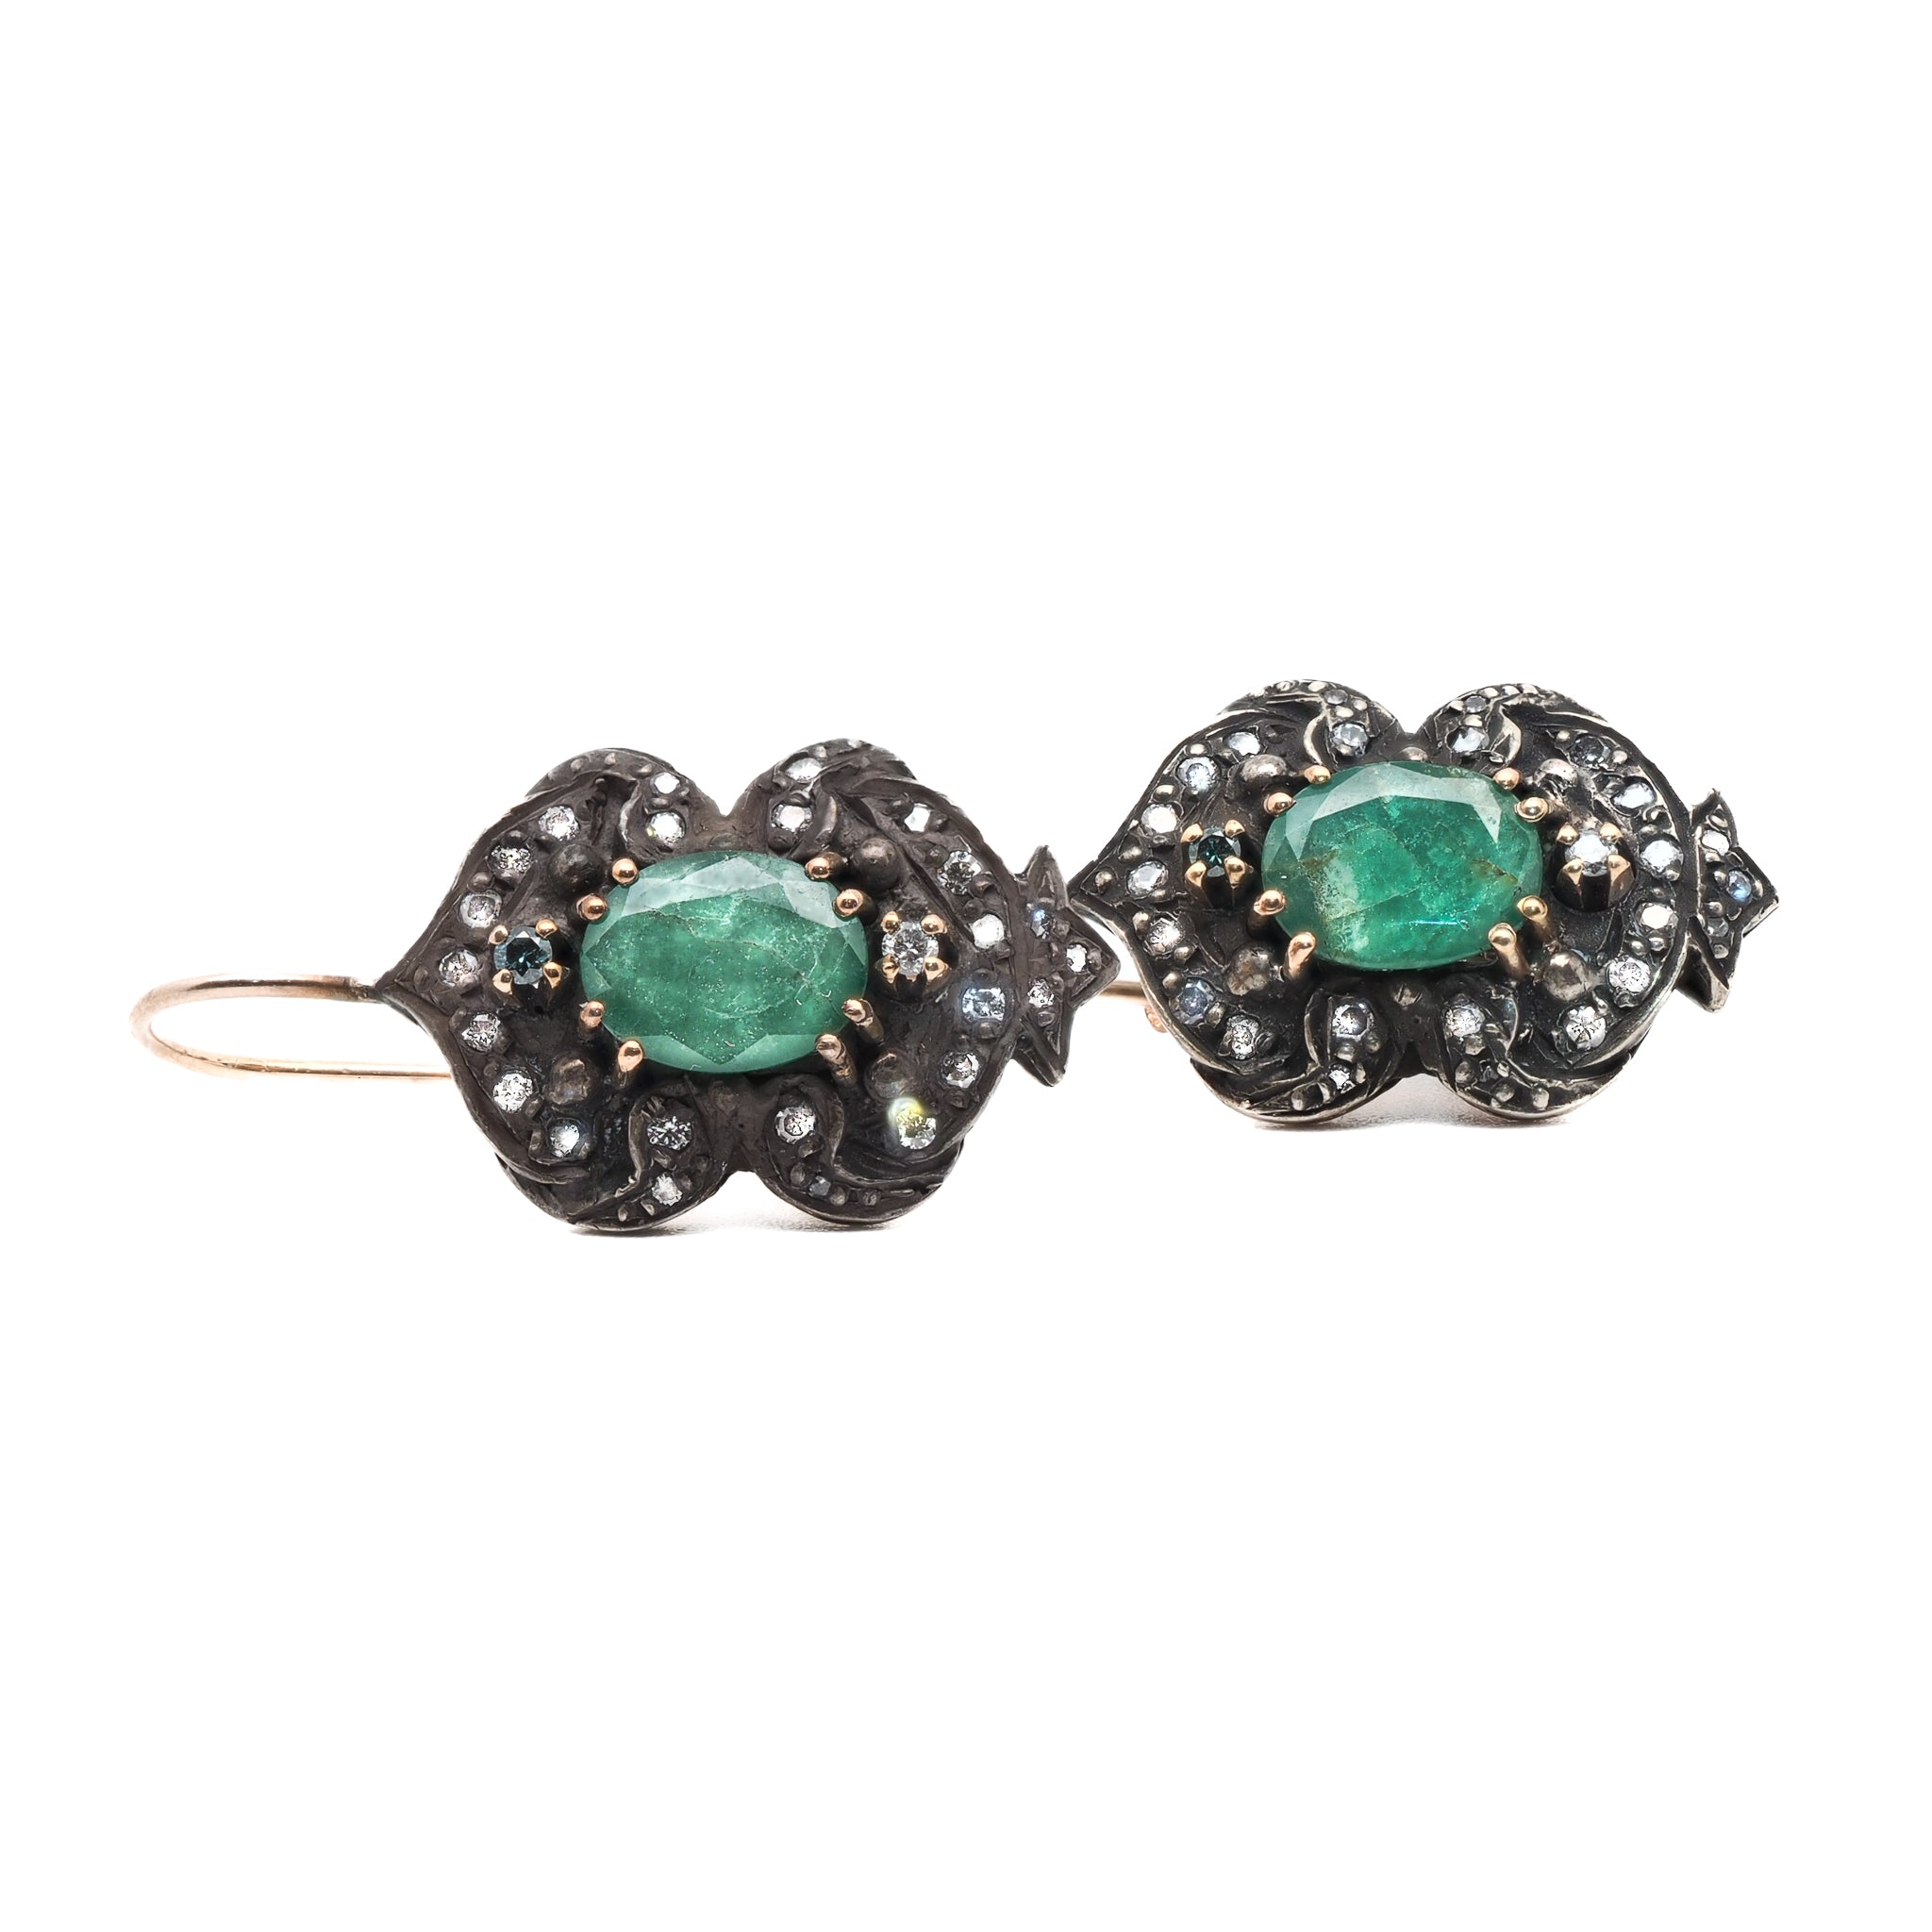 High-Quality Craftsmanship - Vintage Earrings with outstanding quality materials.